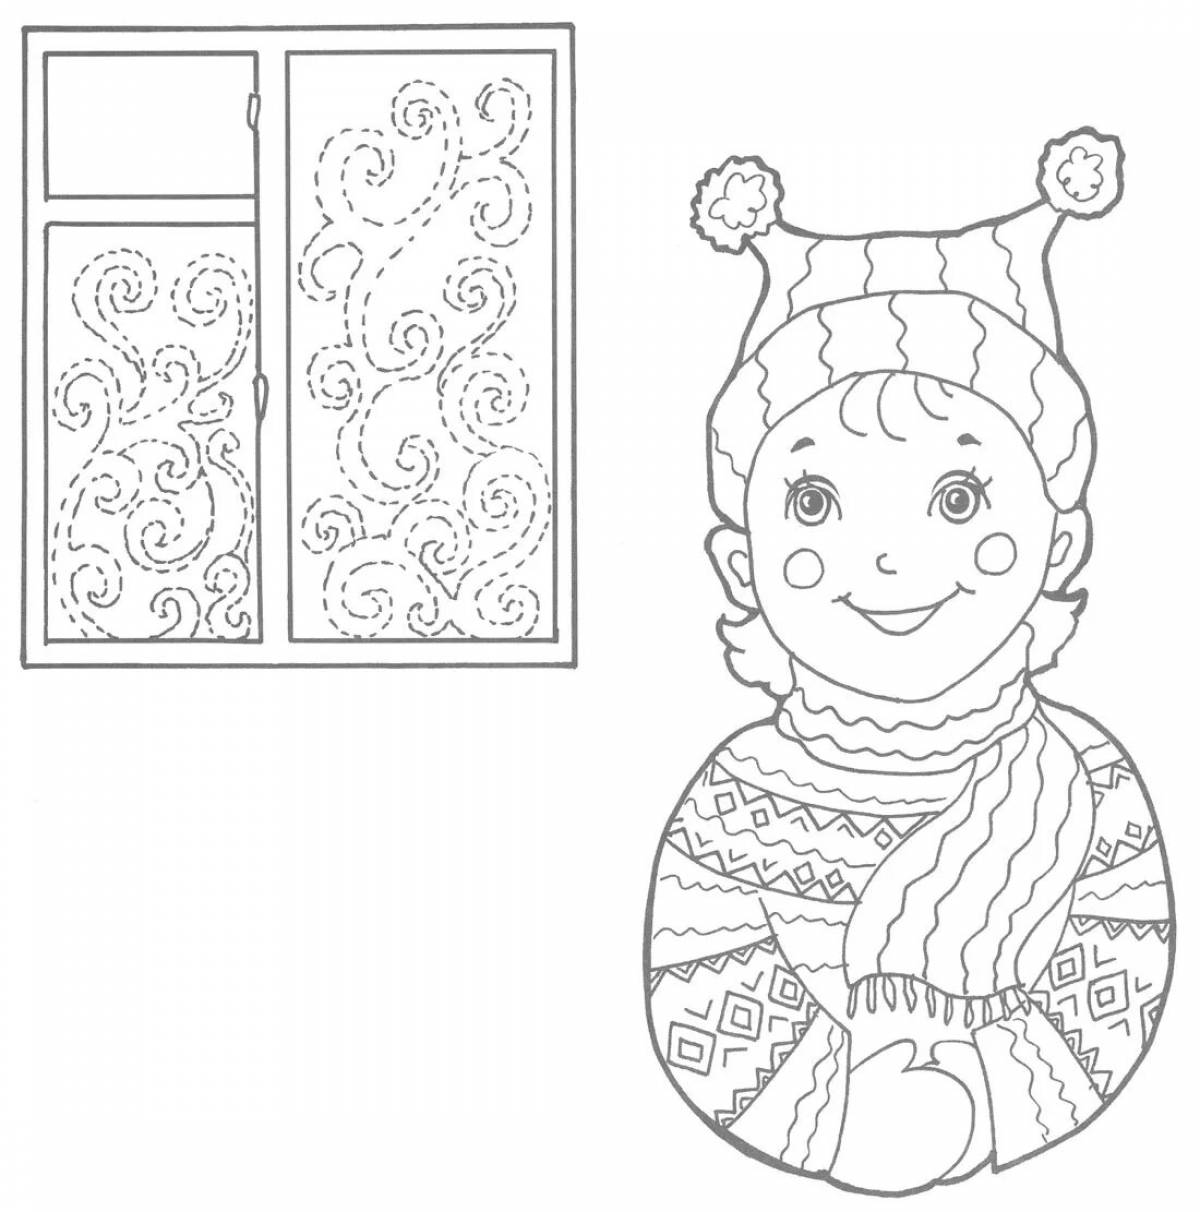 Hypnotizing coloring book patterns on the frost window for children